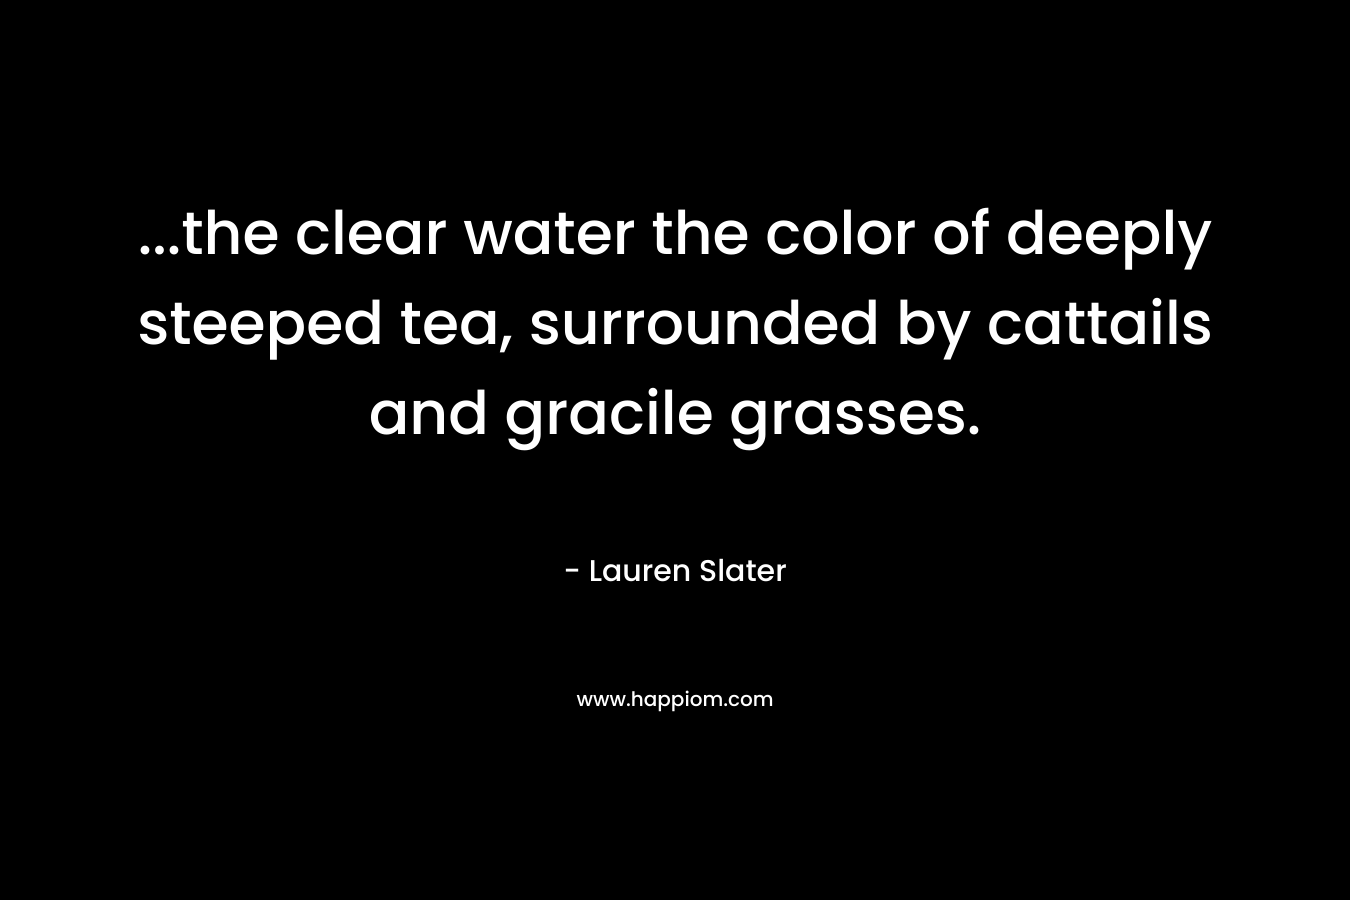 ...the clear water the color of deeply steeped tea, surrounded by cattails and gracile grasses.